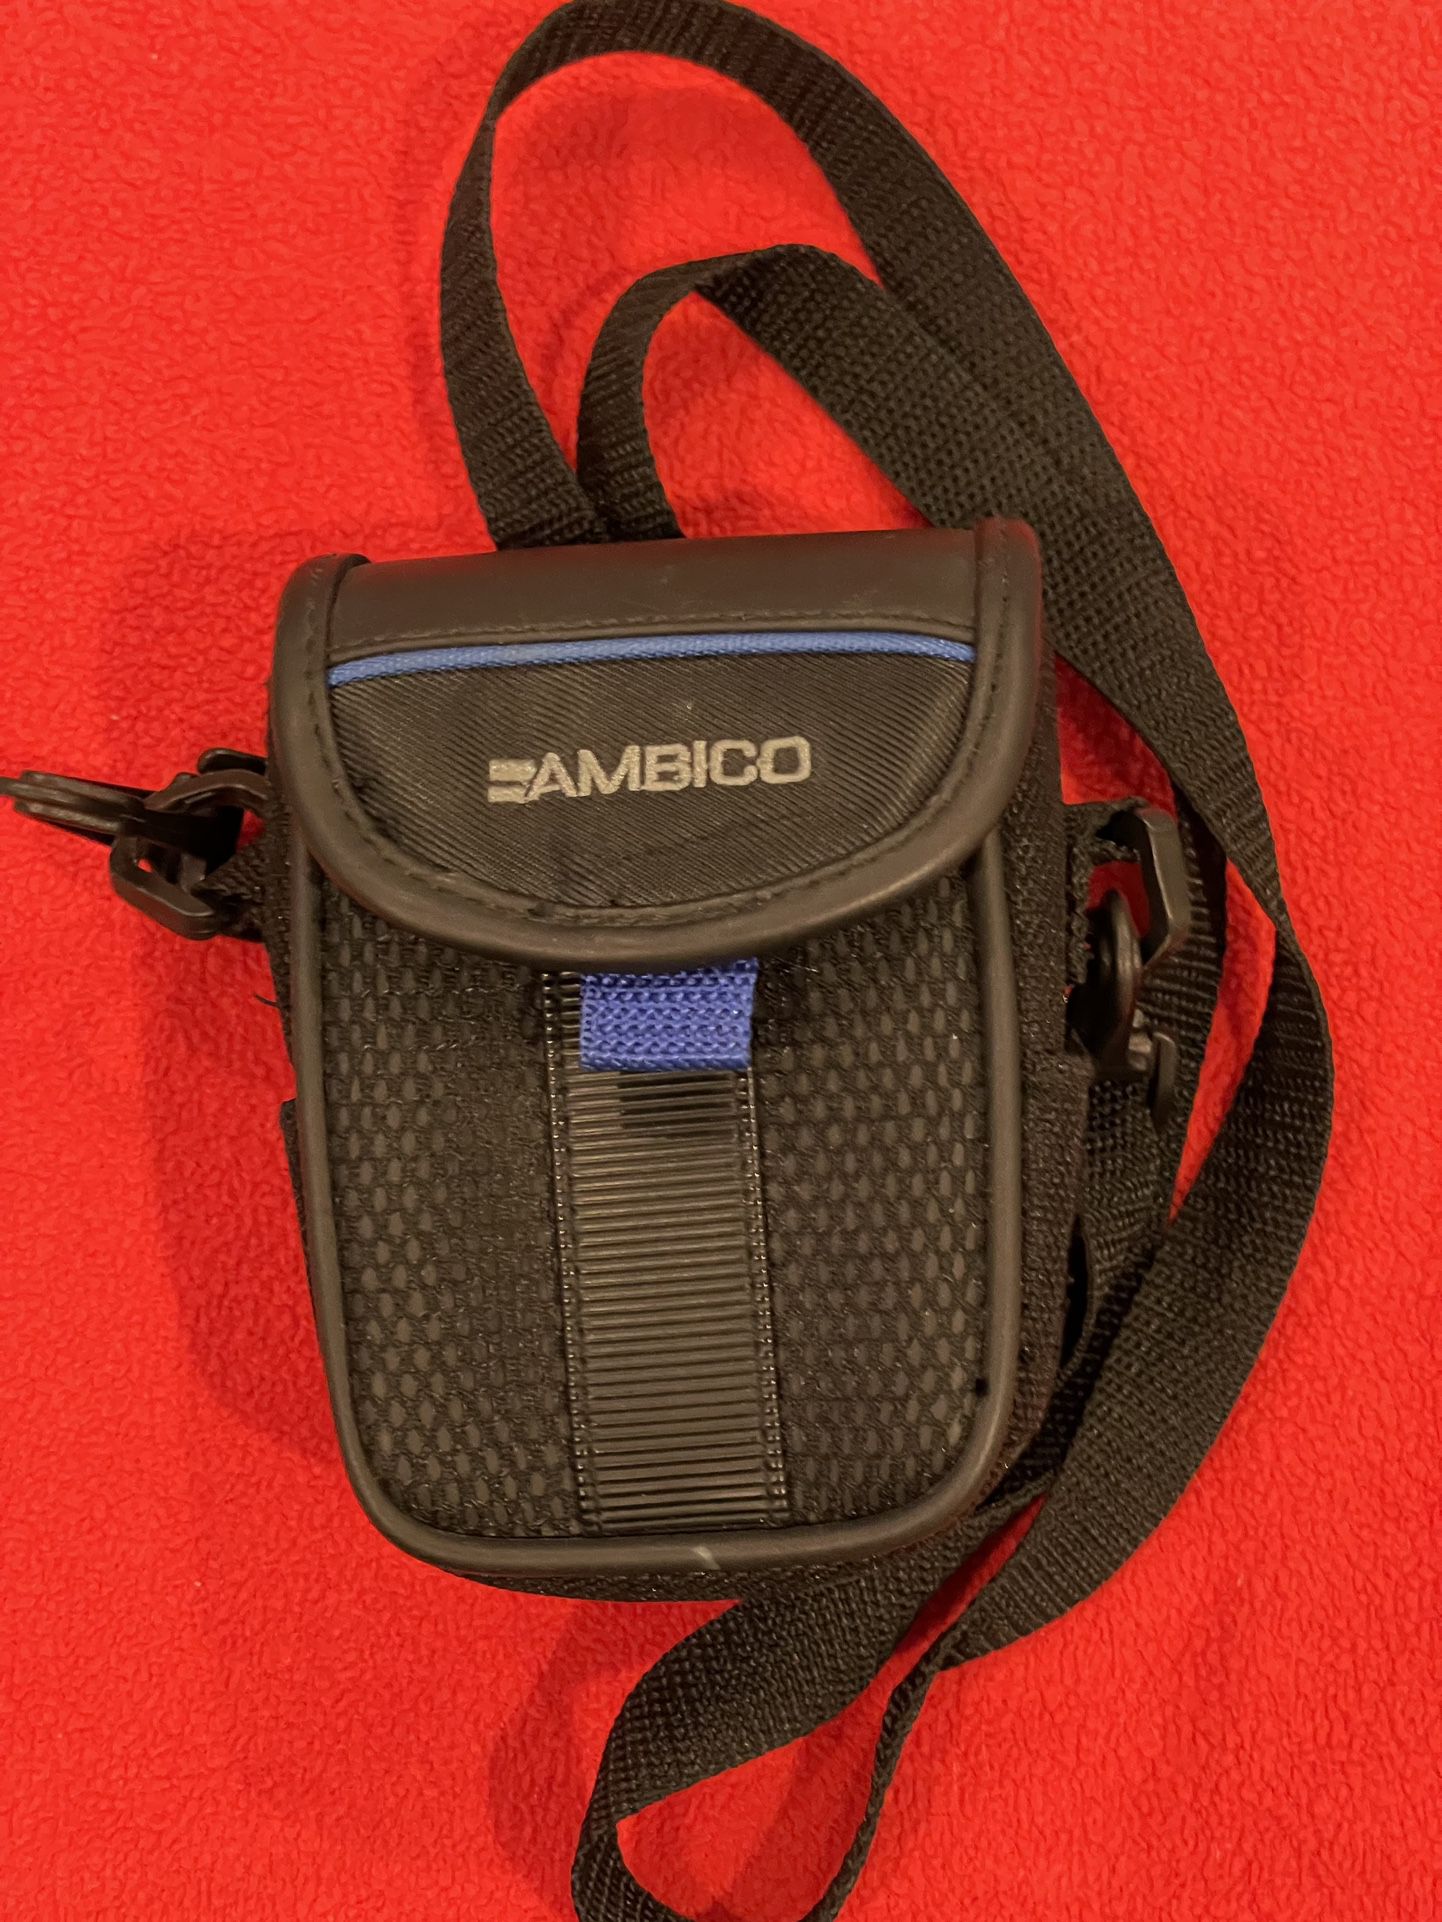 Ambico Camera Case - Gently Used